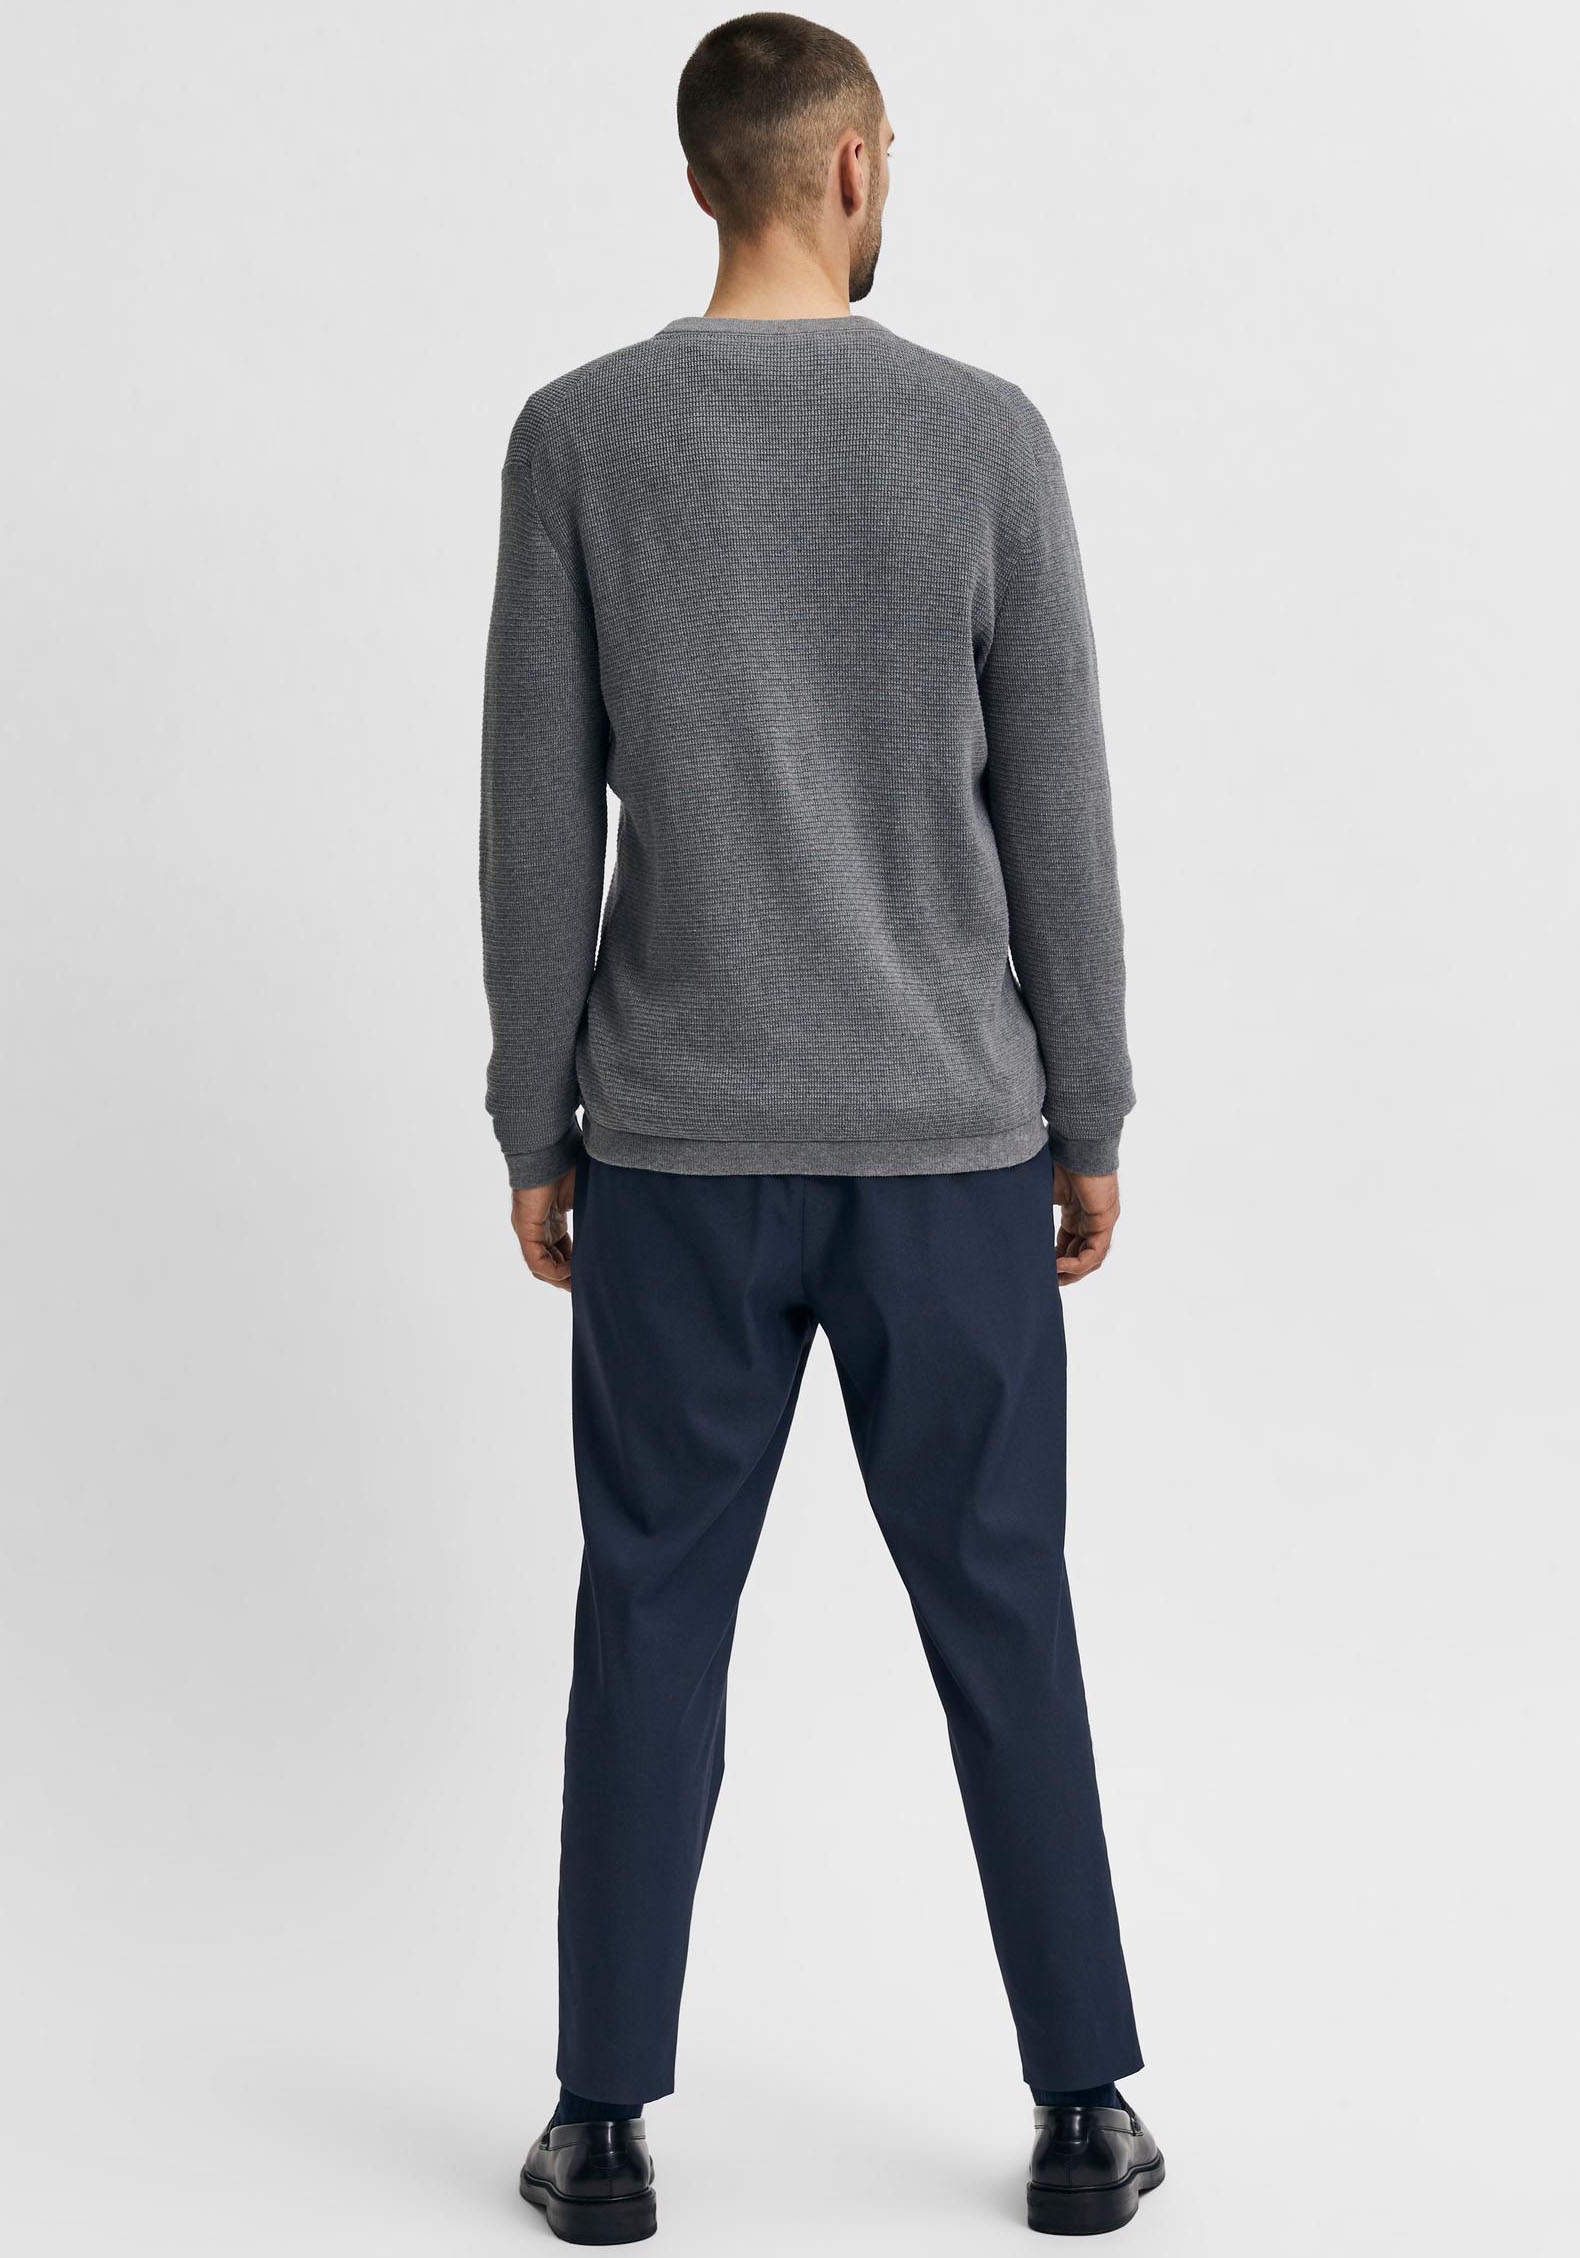 SELECTED HOMME Rundhalspullover »ROCKS KNIT CREW NECK«